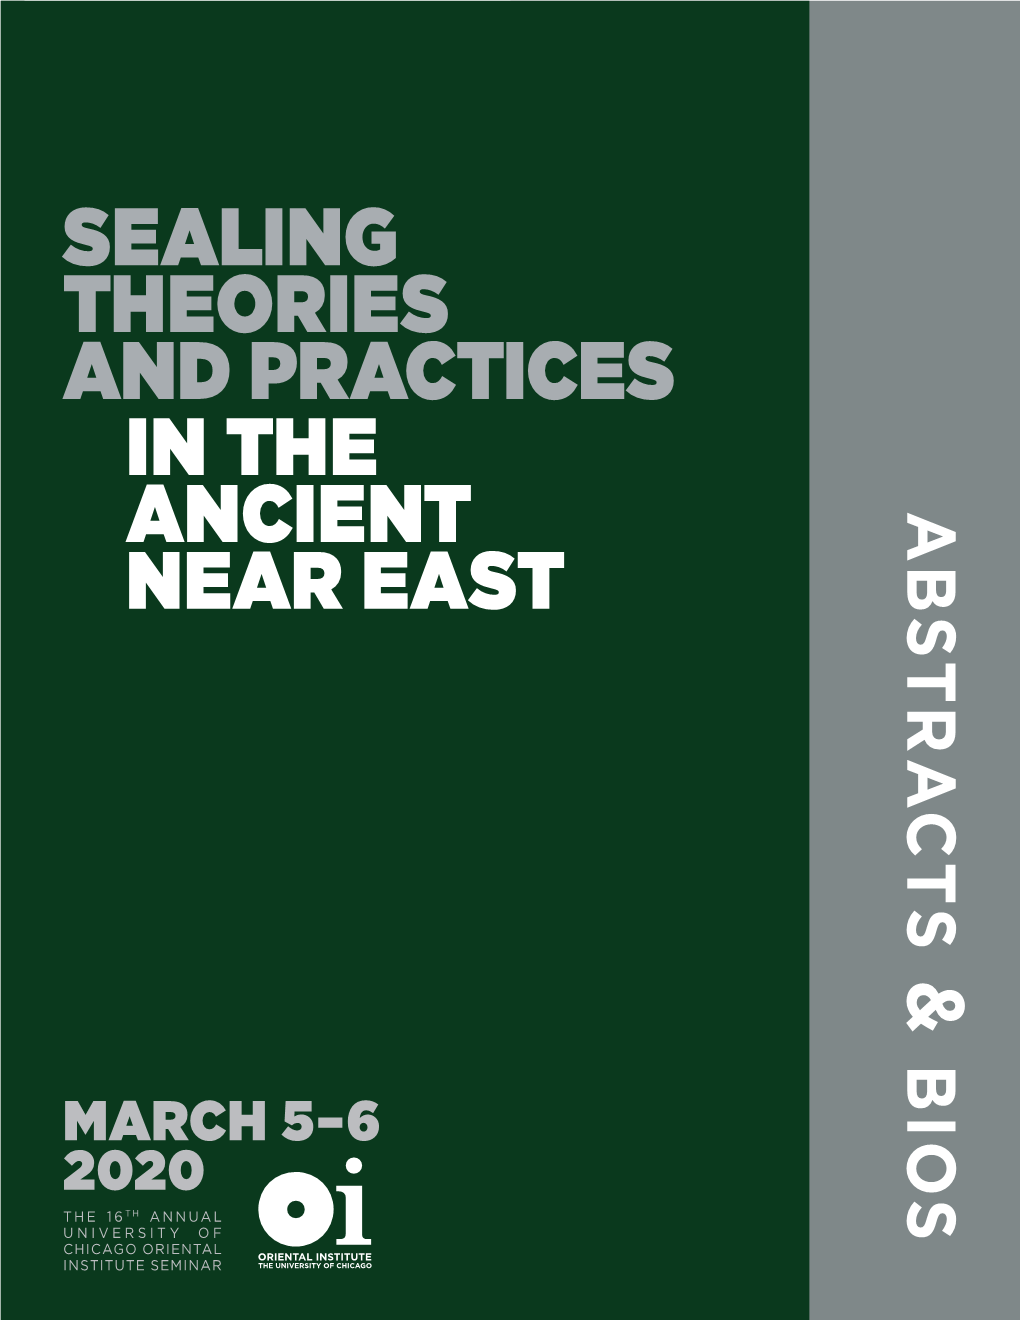 Sealing Theories and Practices in the Ancient Near East